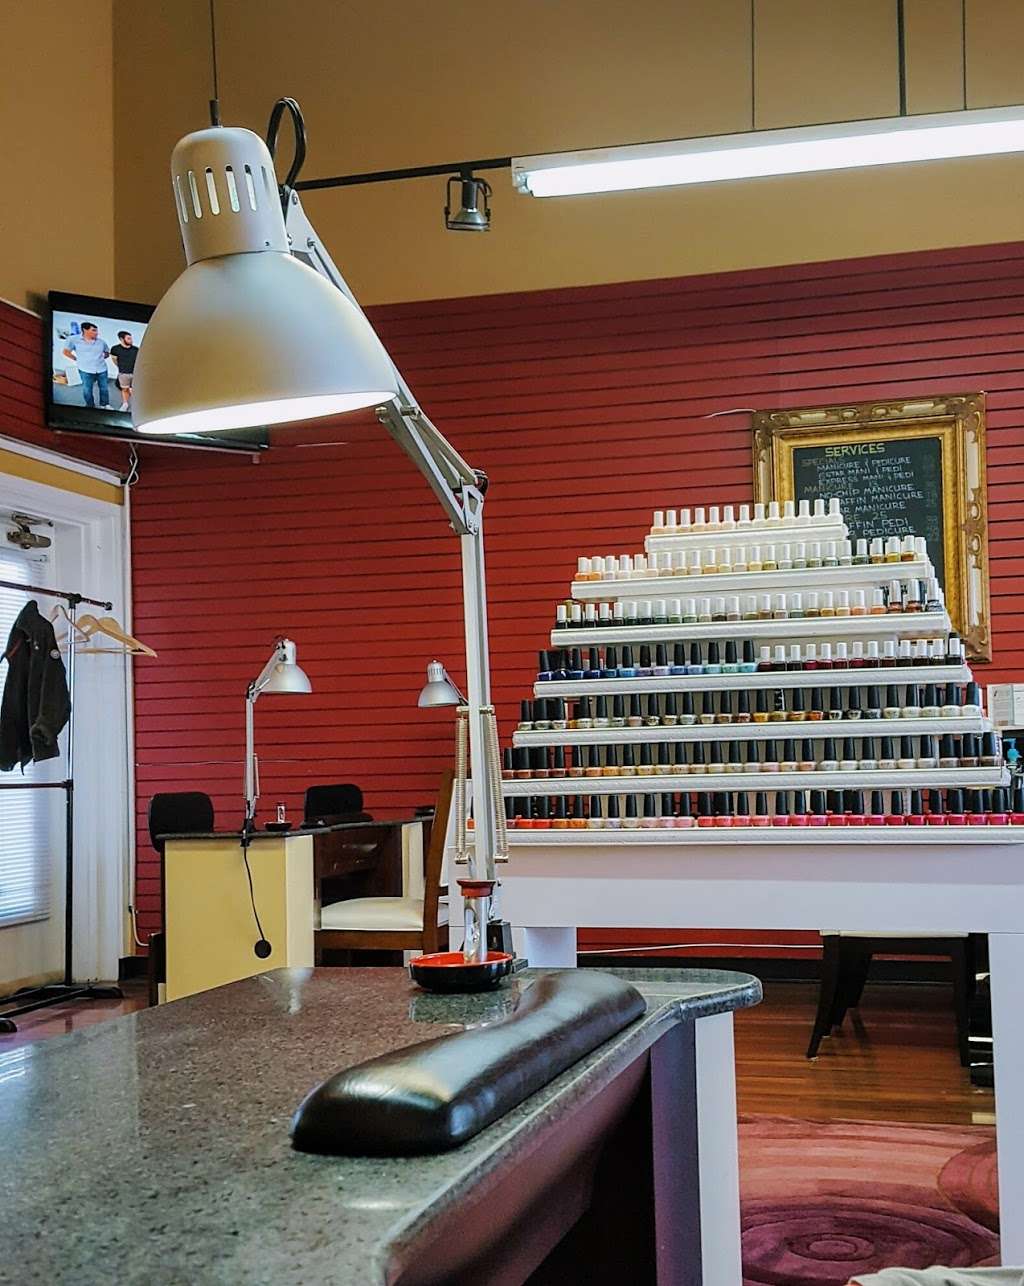 Red 6 Nails Salon | 3510 Milwaukee Ave, Northbrook, IL 60062 | Phone: (847) 813-5244